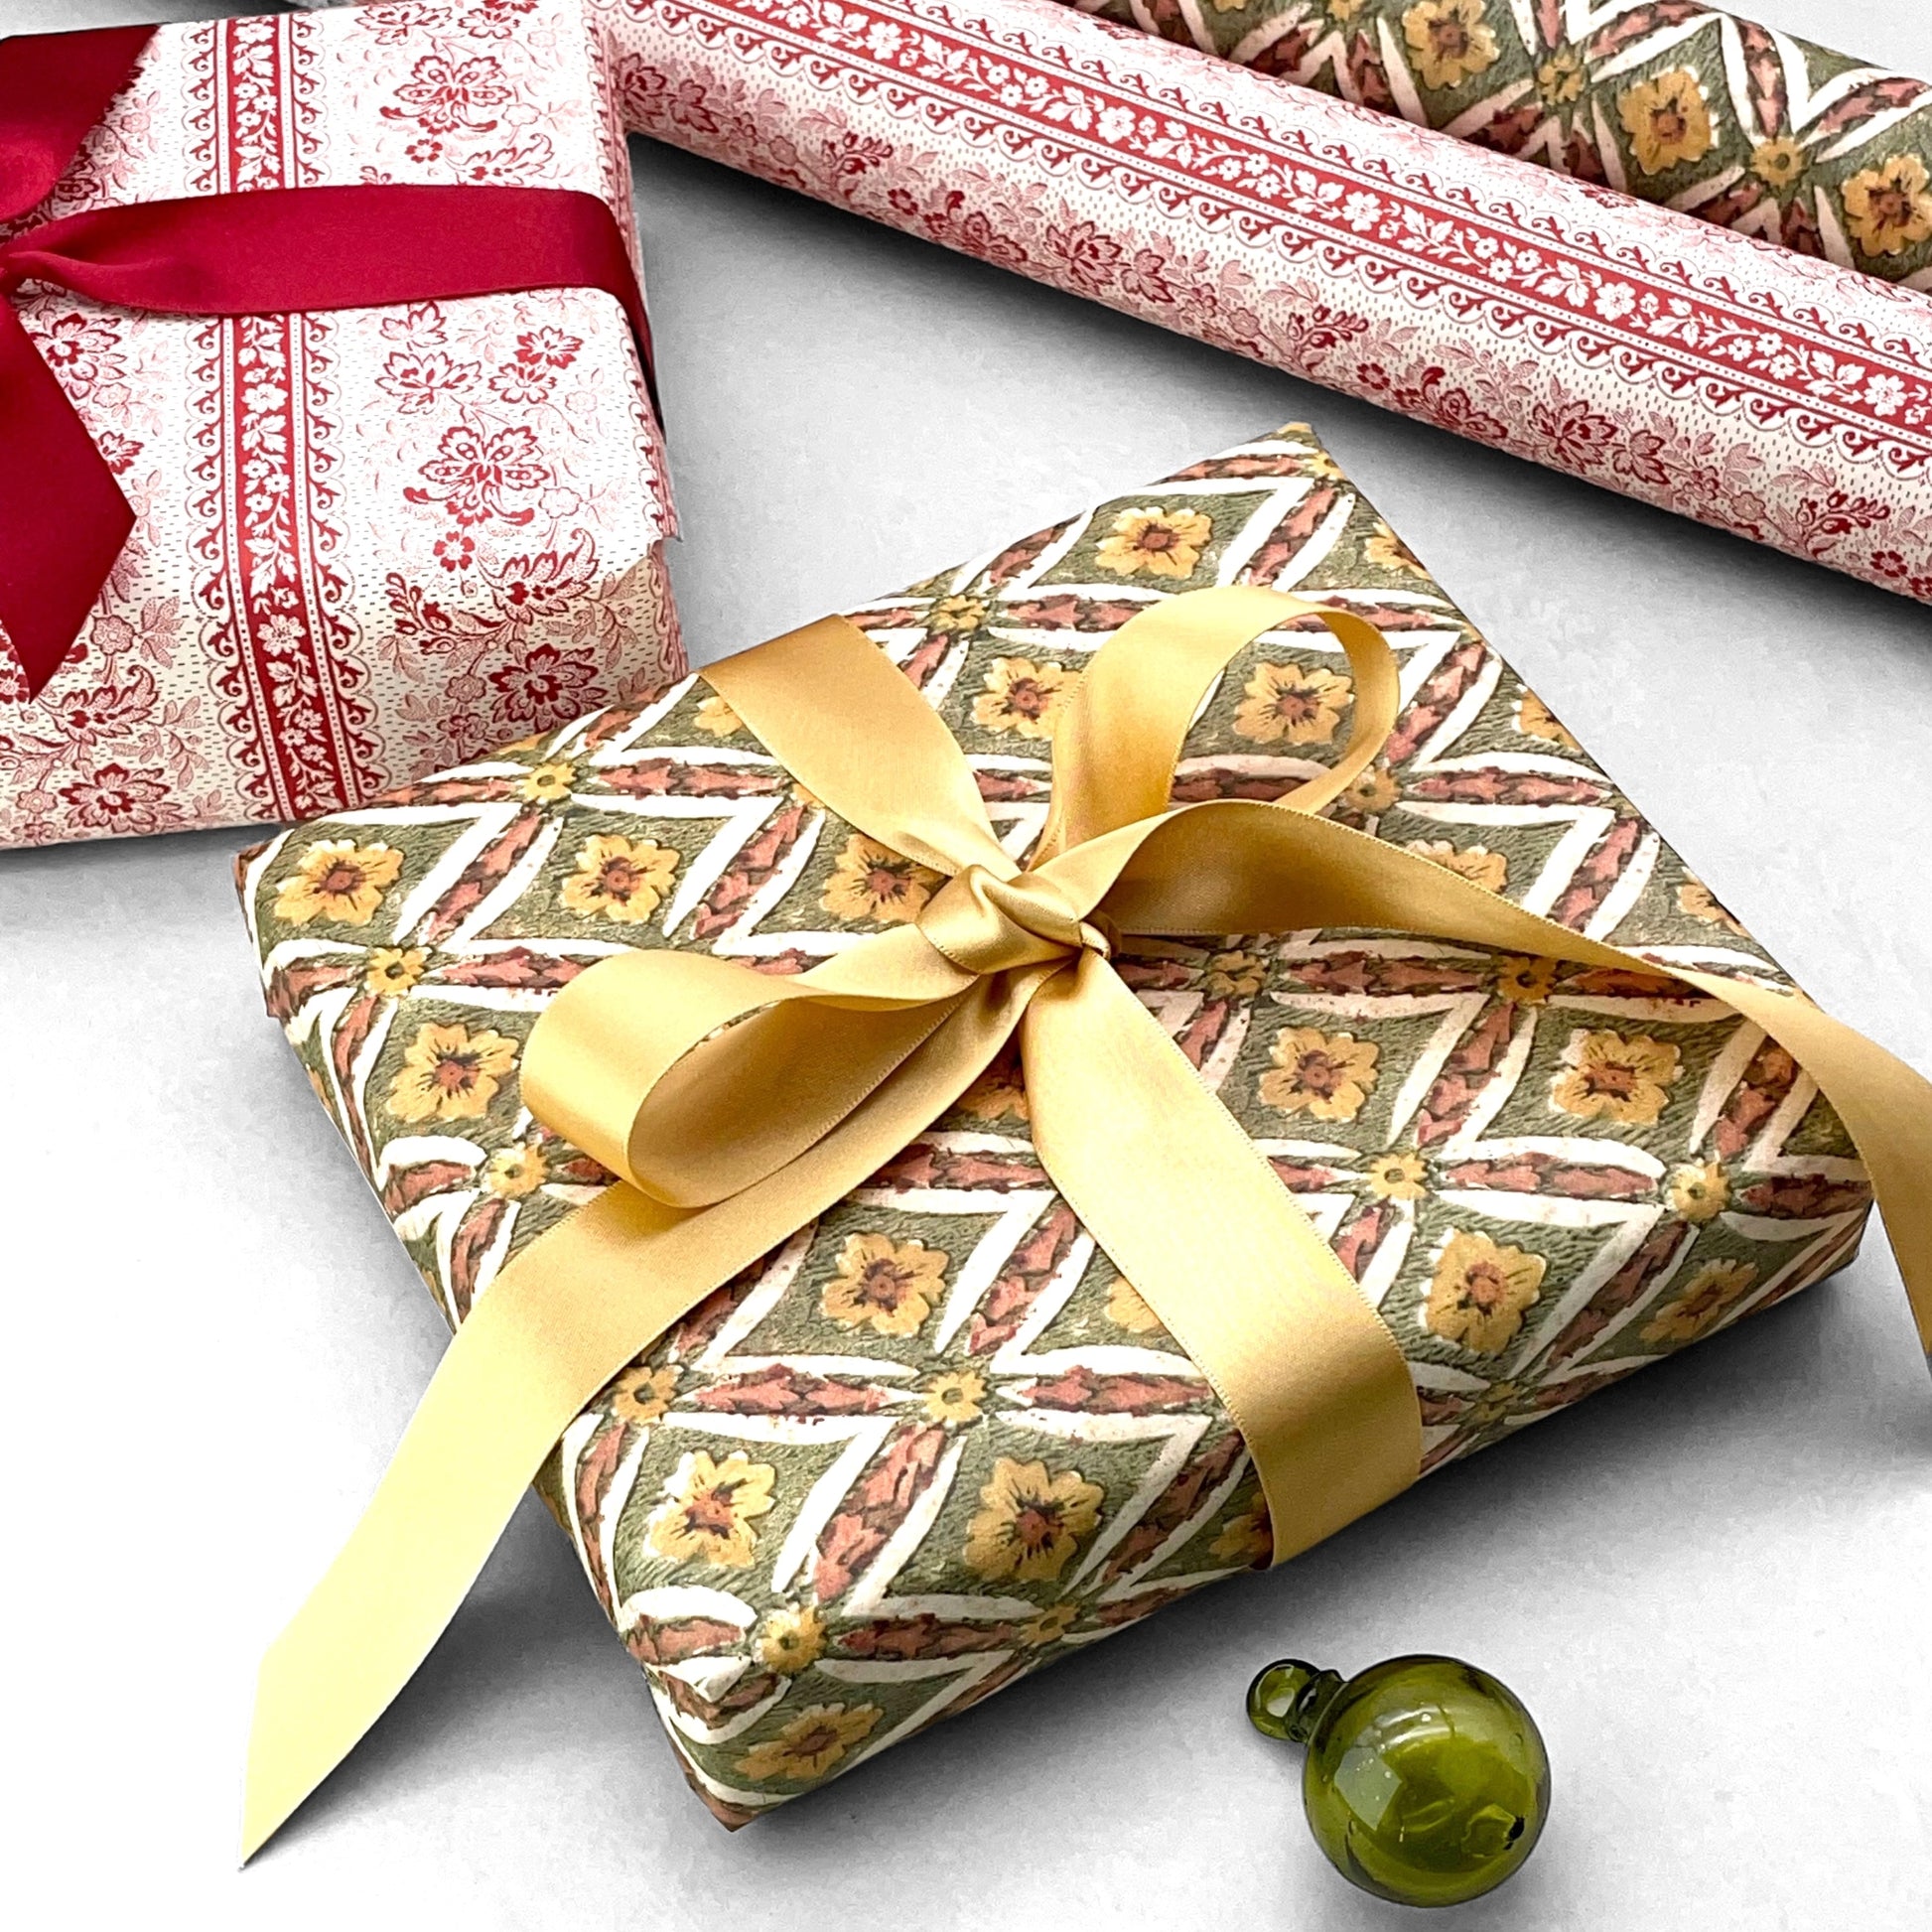 italian Remondini patterned wrapping paper by Tassotti. a repeat diamond pattern with flowers in sage green, soft peach and yellow on white background. Wrapped as a present with a gold bow